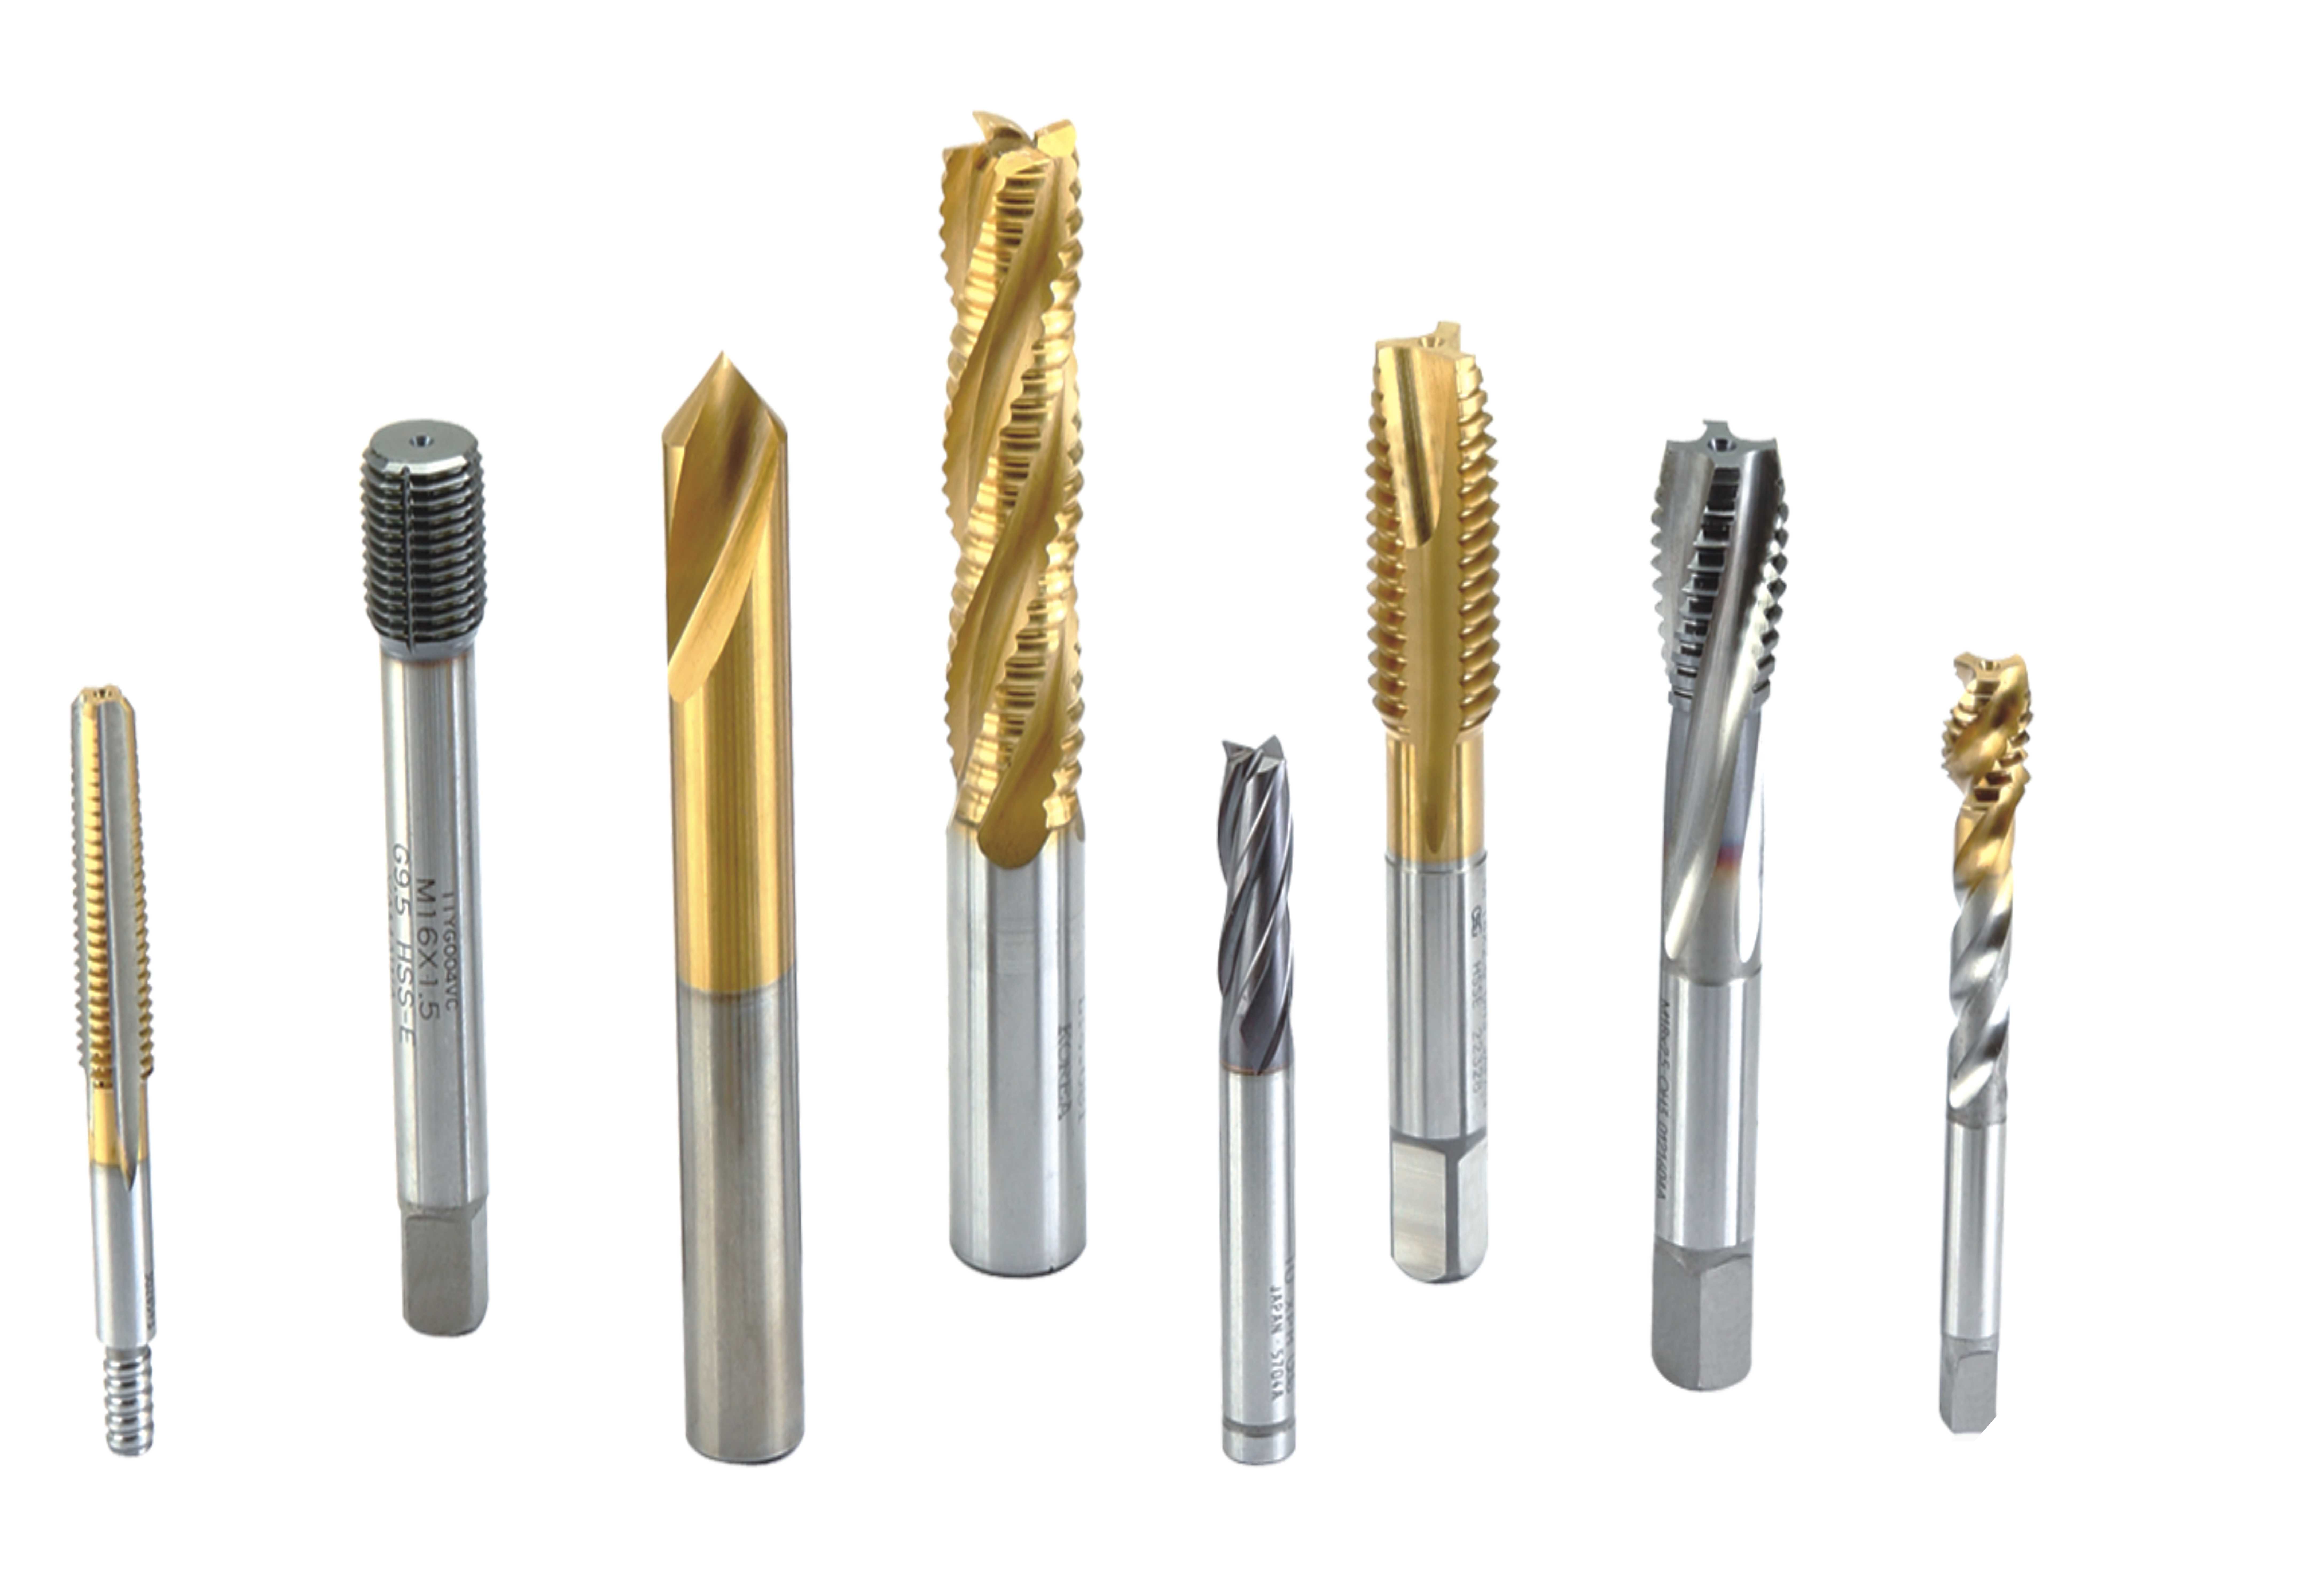 Discover the benefits of using machine taps from Danyang Yuxiang Tools Co., Ltd.